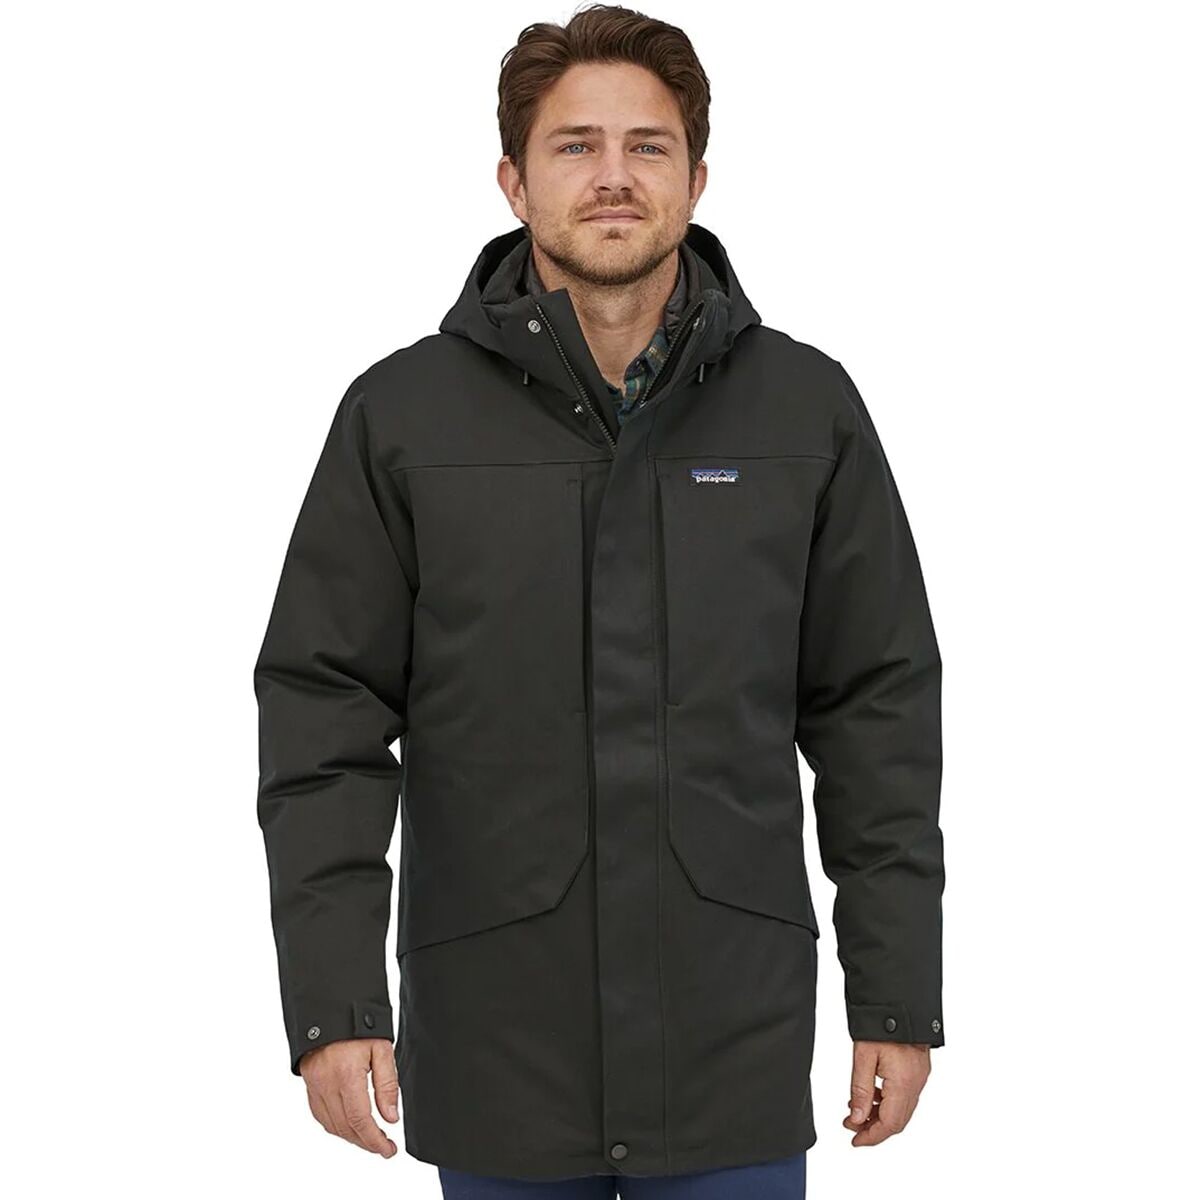 dwaas Rood band Tres 3-in-1 Parka - Men's by Patagonia | US-Parks.com